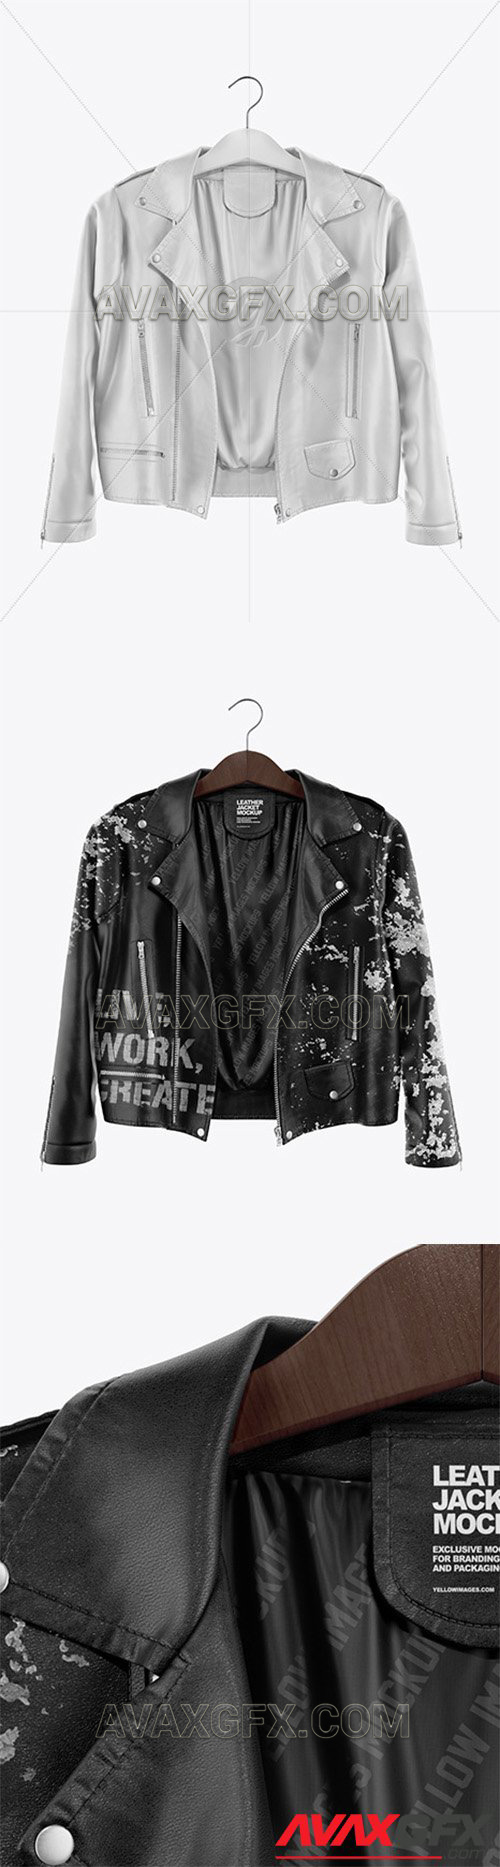 Download Leather Jacket Mockup 59591 » AVAXGFX - All Downloads that ...